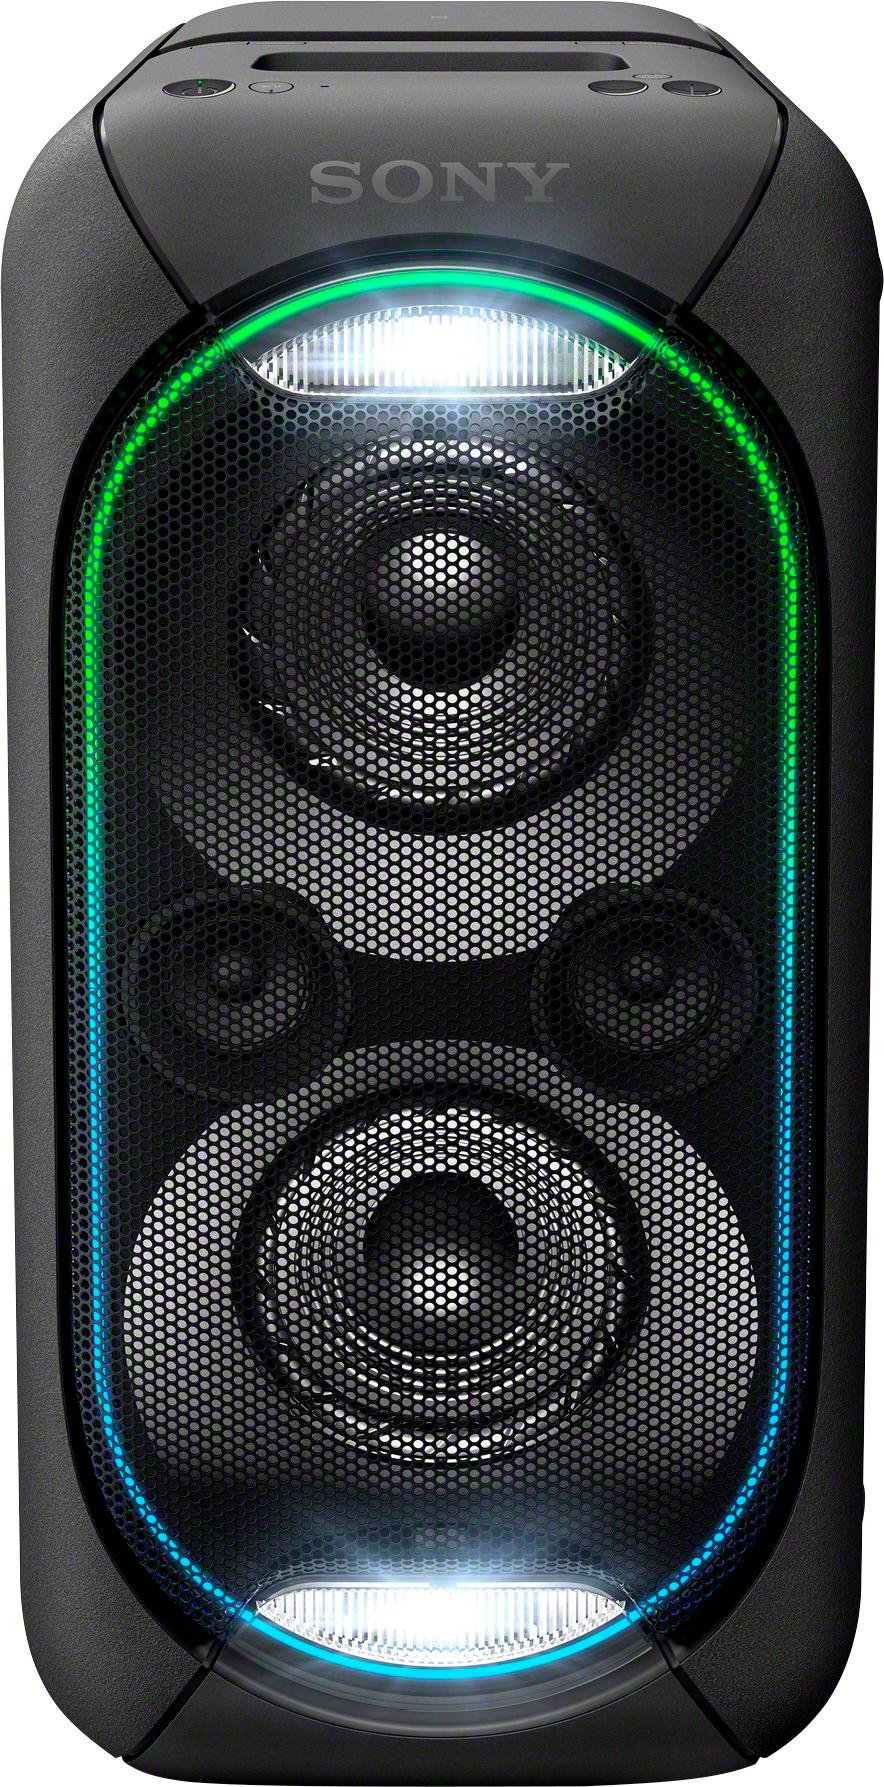 Sony - High Power XB60 Portable Bluetooth Speaker - Black was $349.99 now $199.99 (43.0% off)